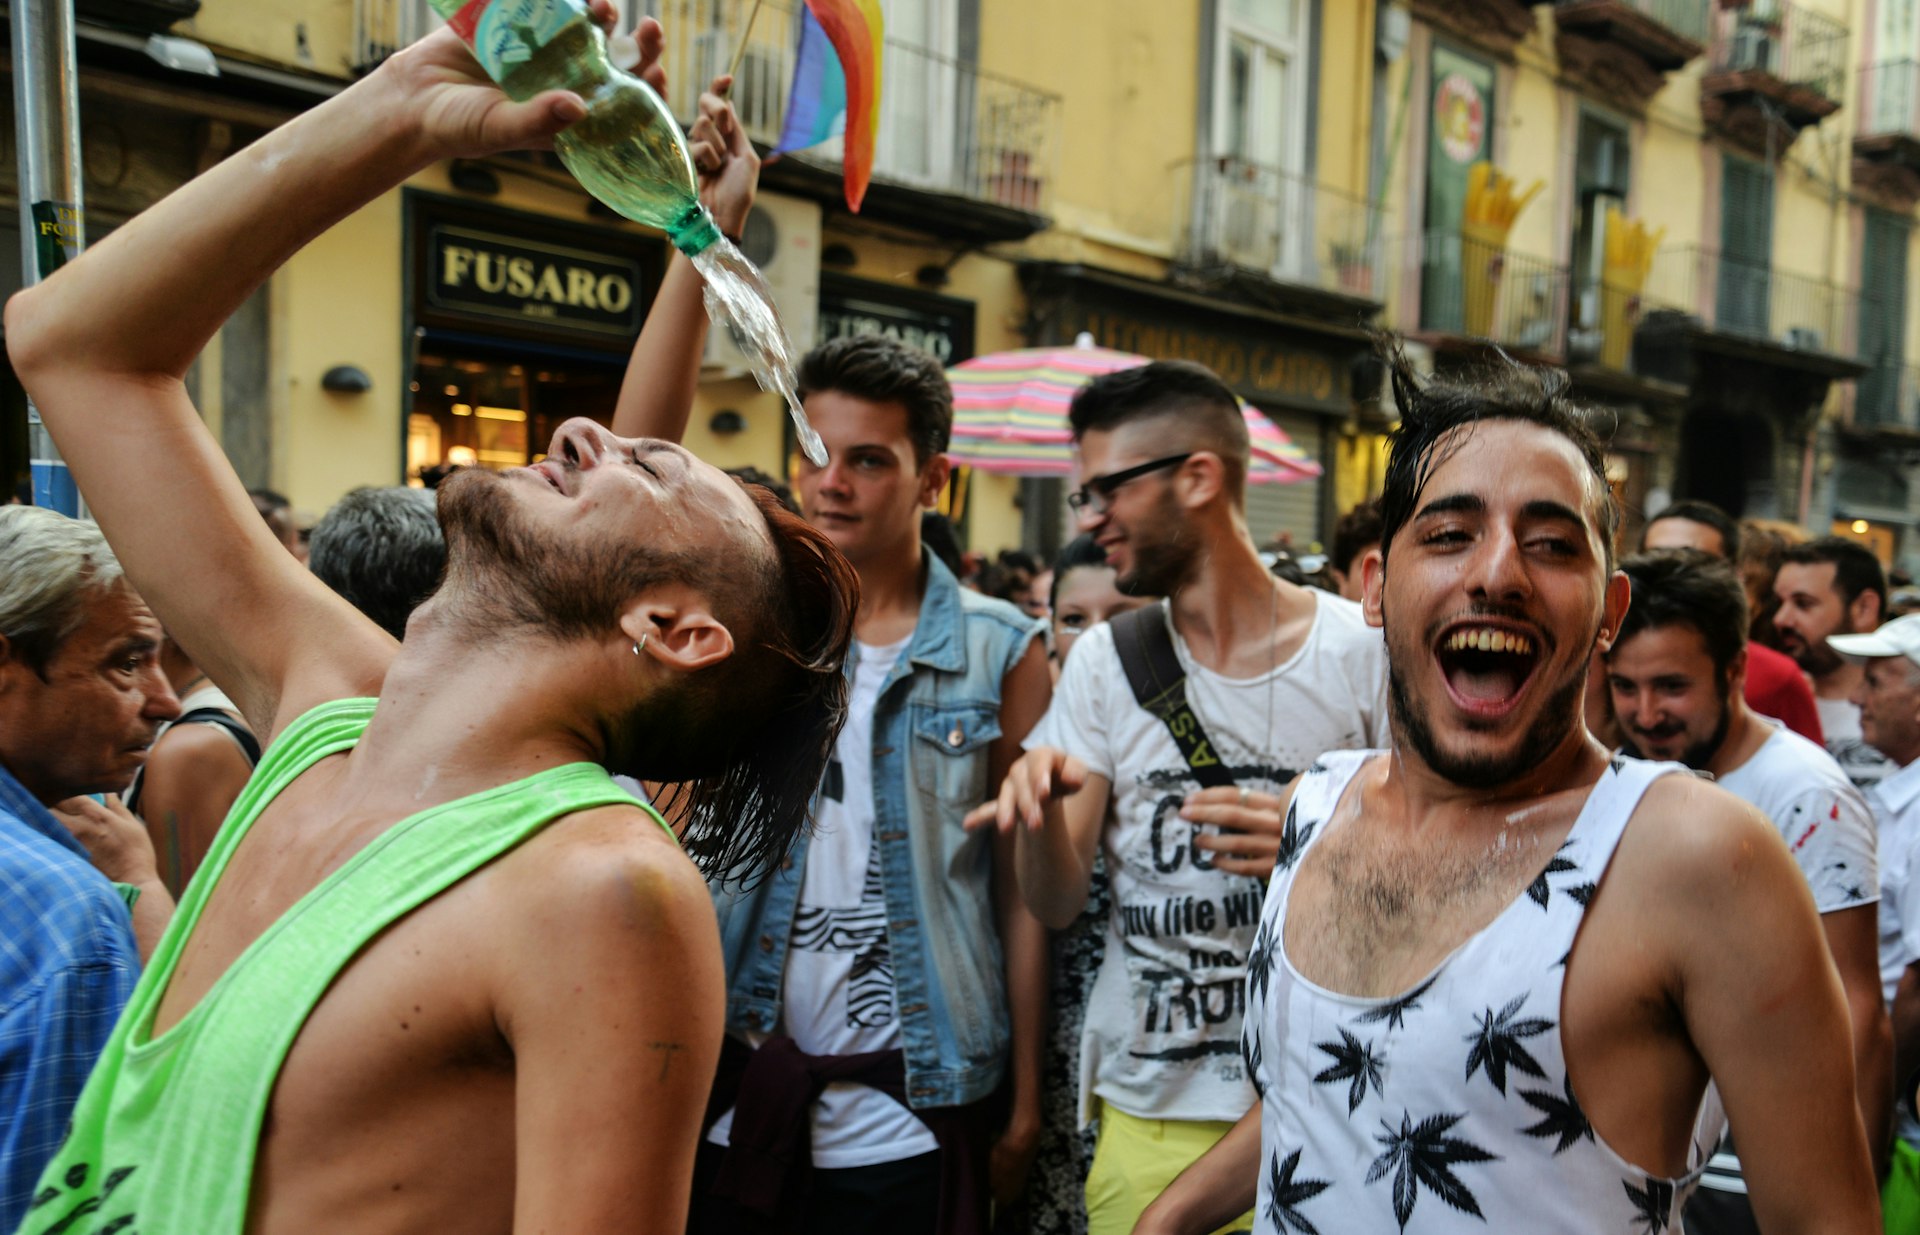 Men laughing and smiling as they celebrate the Gay Pride parade in Naples, Italy